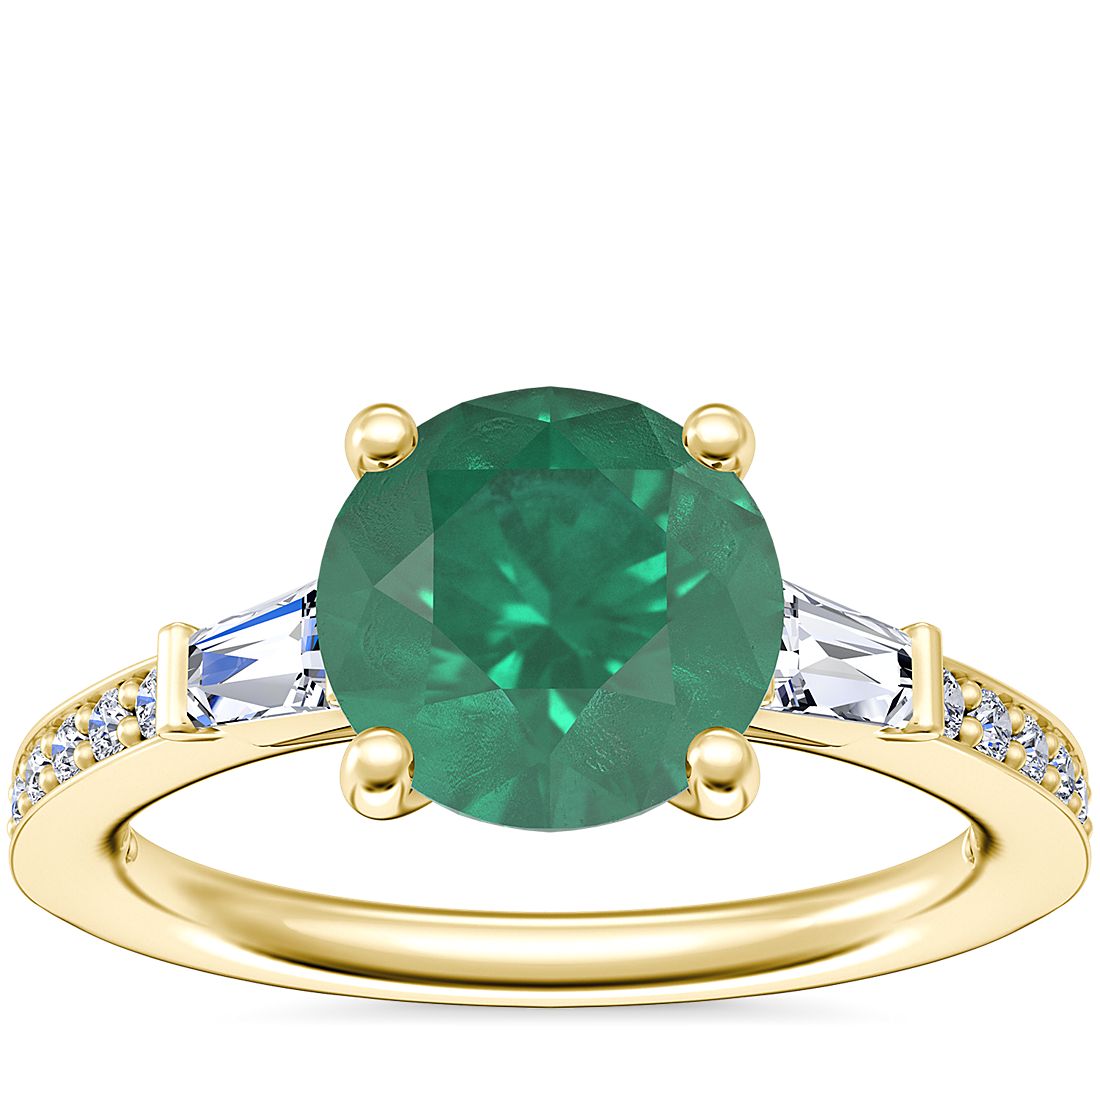 Tapered Baguette Diamond Cathedral Engagement Ringwith Round Emerald in 14k Yellow Gold (8mm)